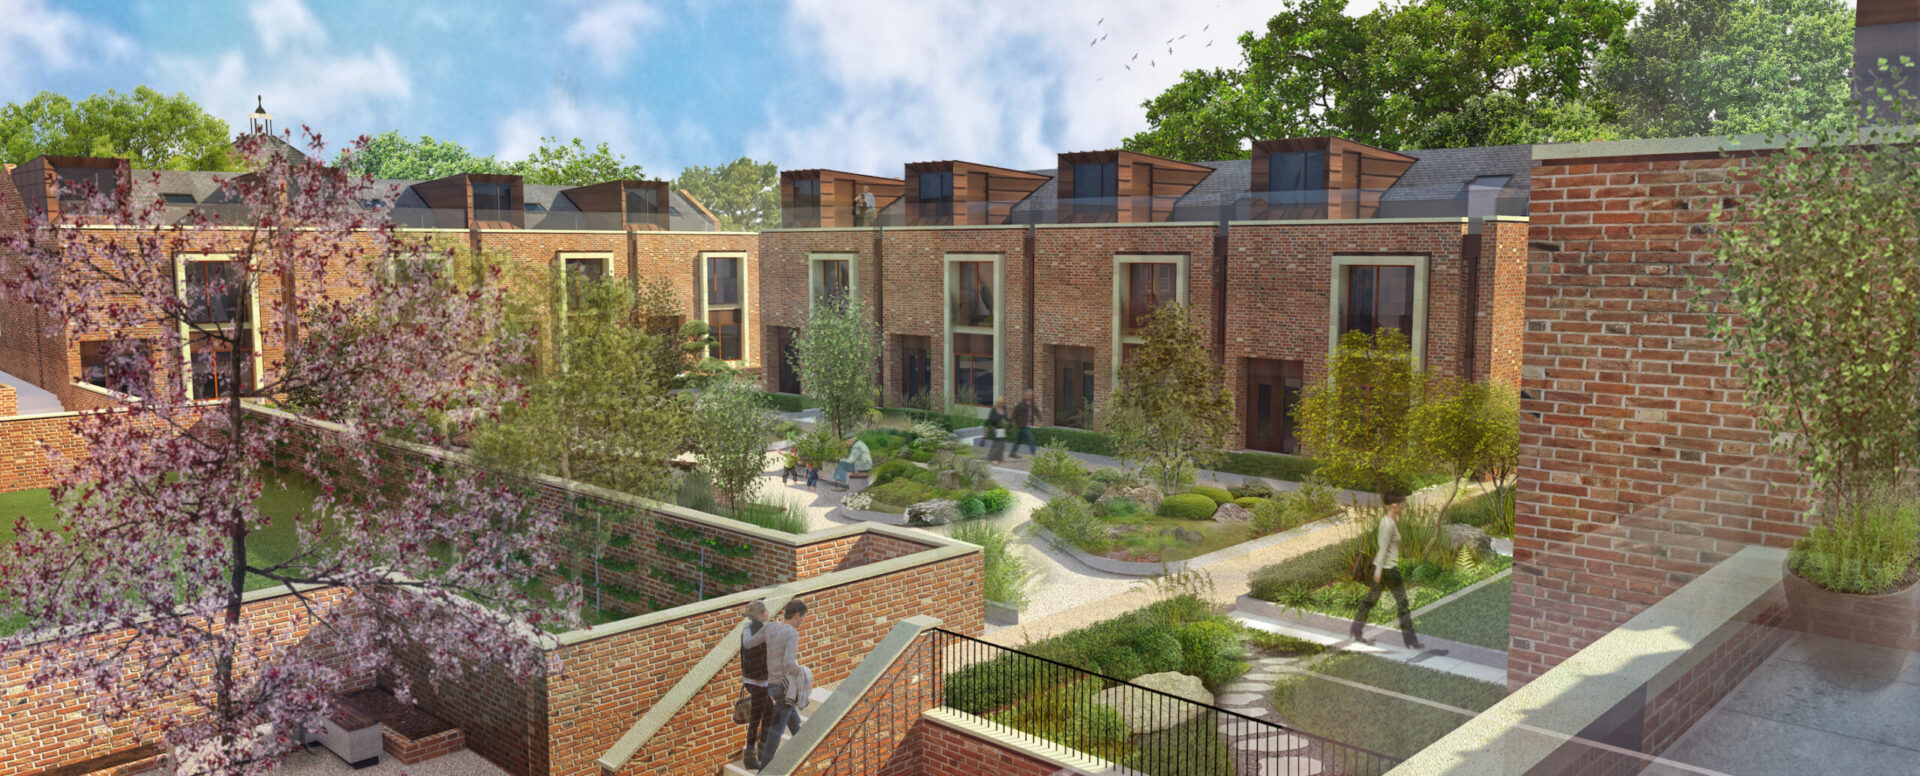 The plans include an extension of the courtyard buildings to create 17 new homes